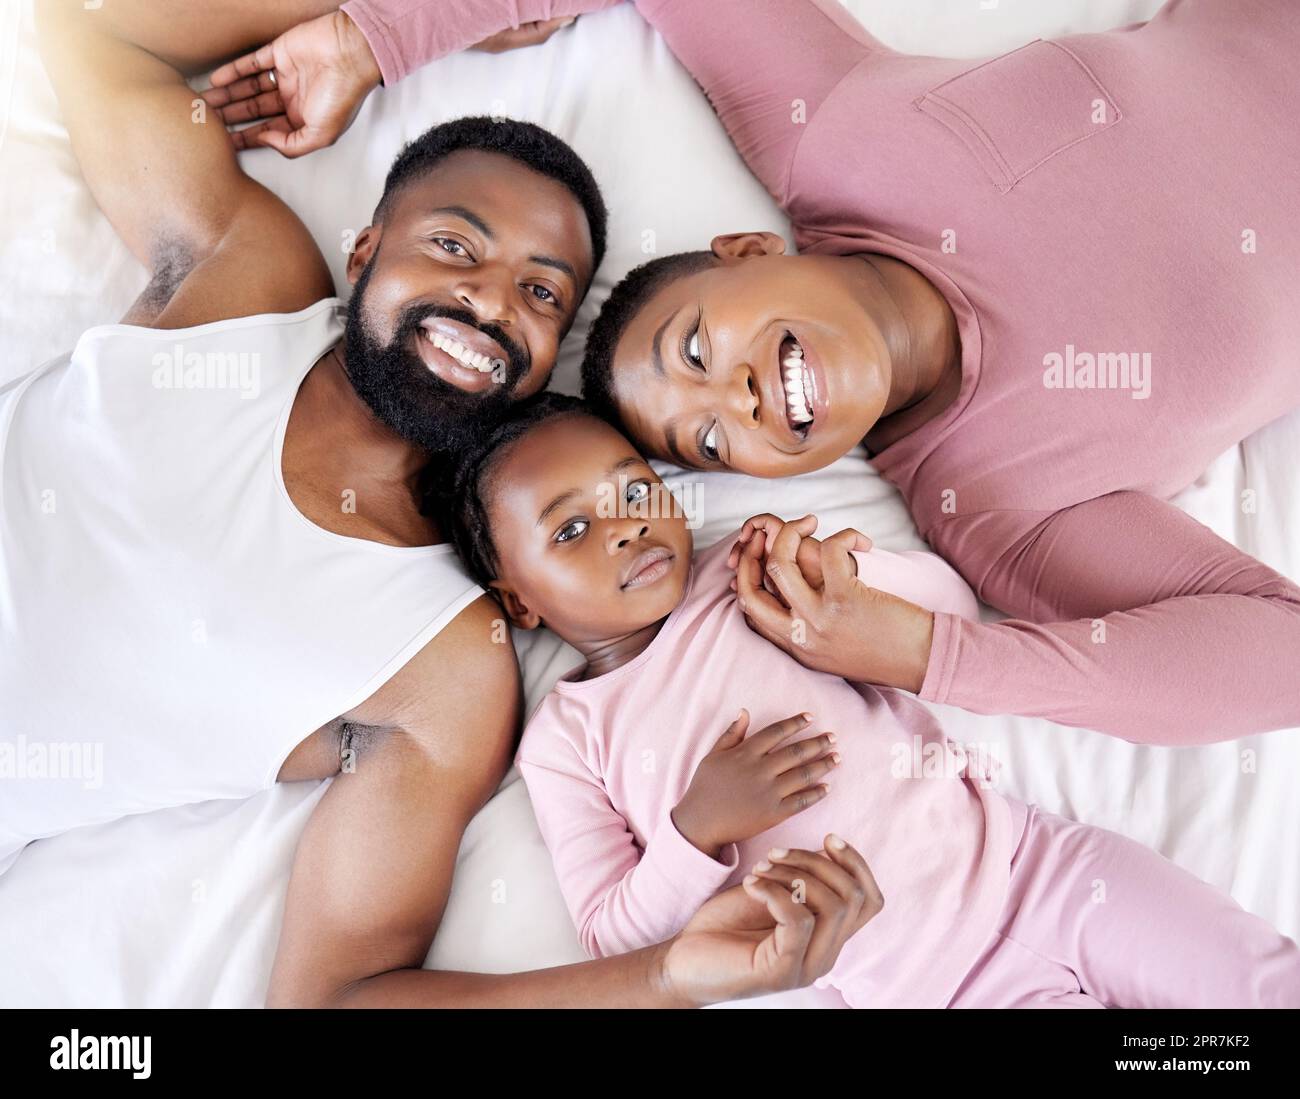 Our task is to transform ourselves. a young family bonding in bed together. Stock Photo